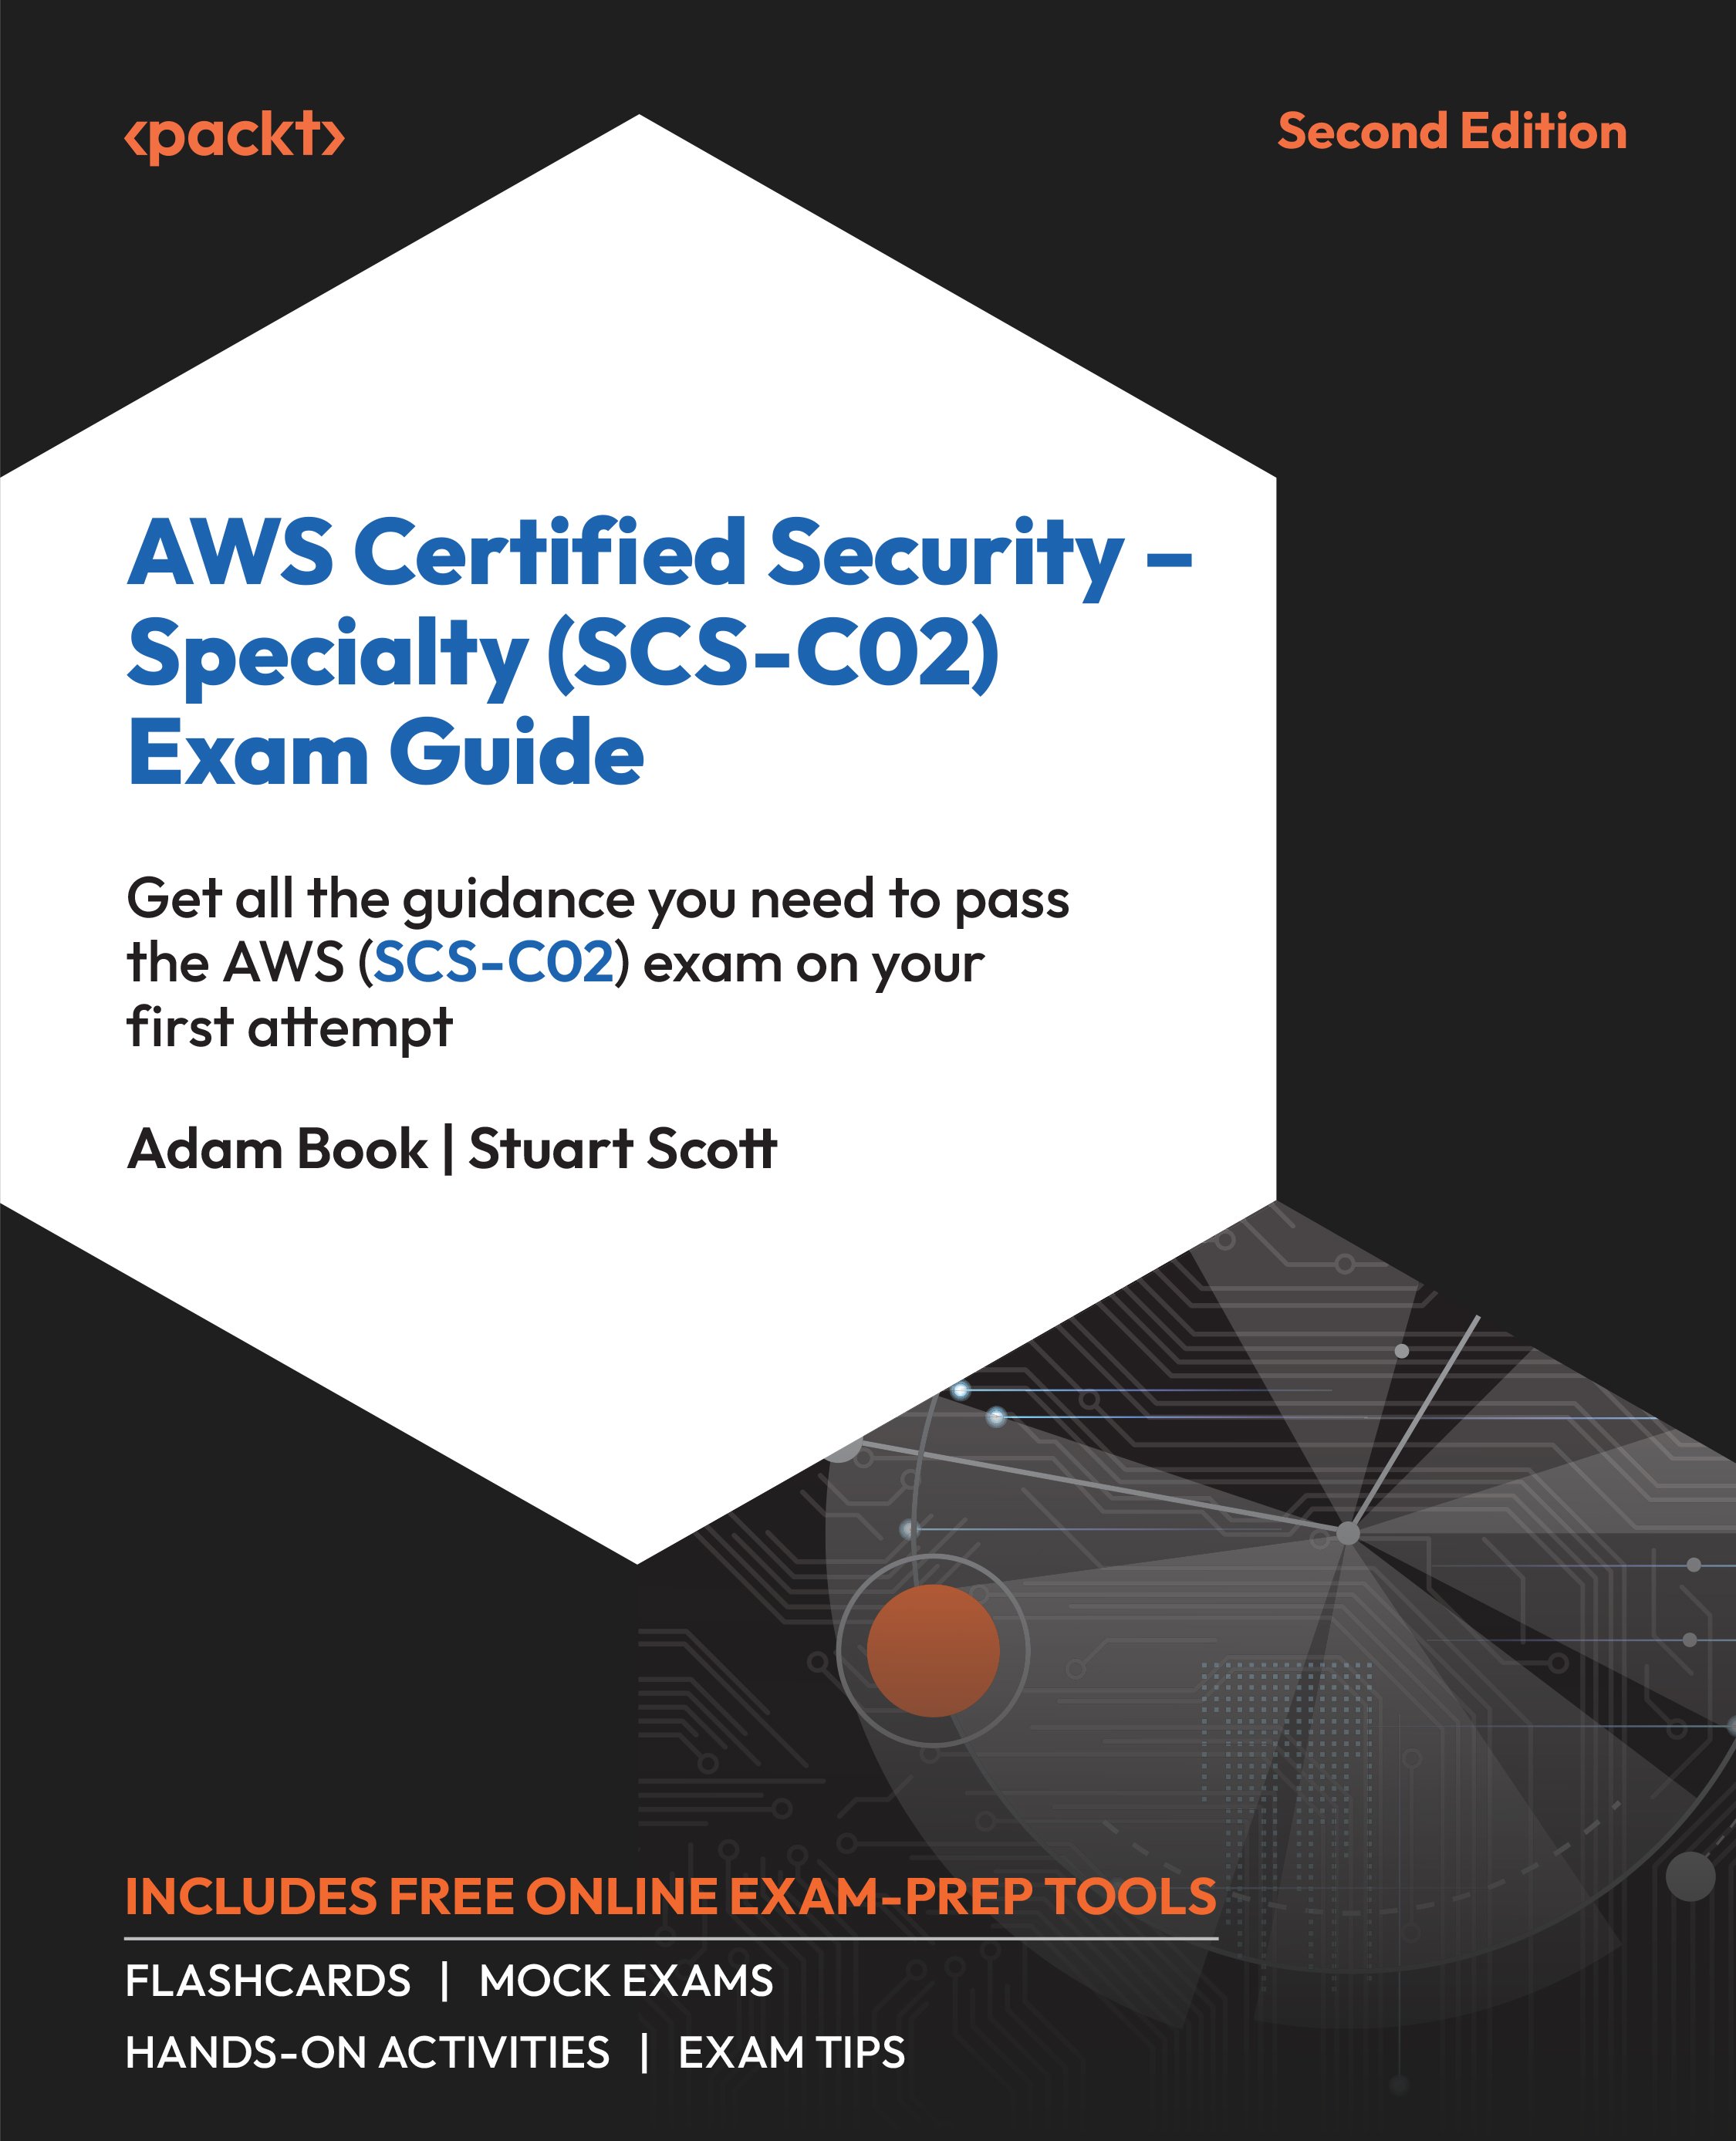 AWS Certified Security – Specialty (SCS-C02) Exam Guide